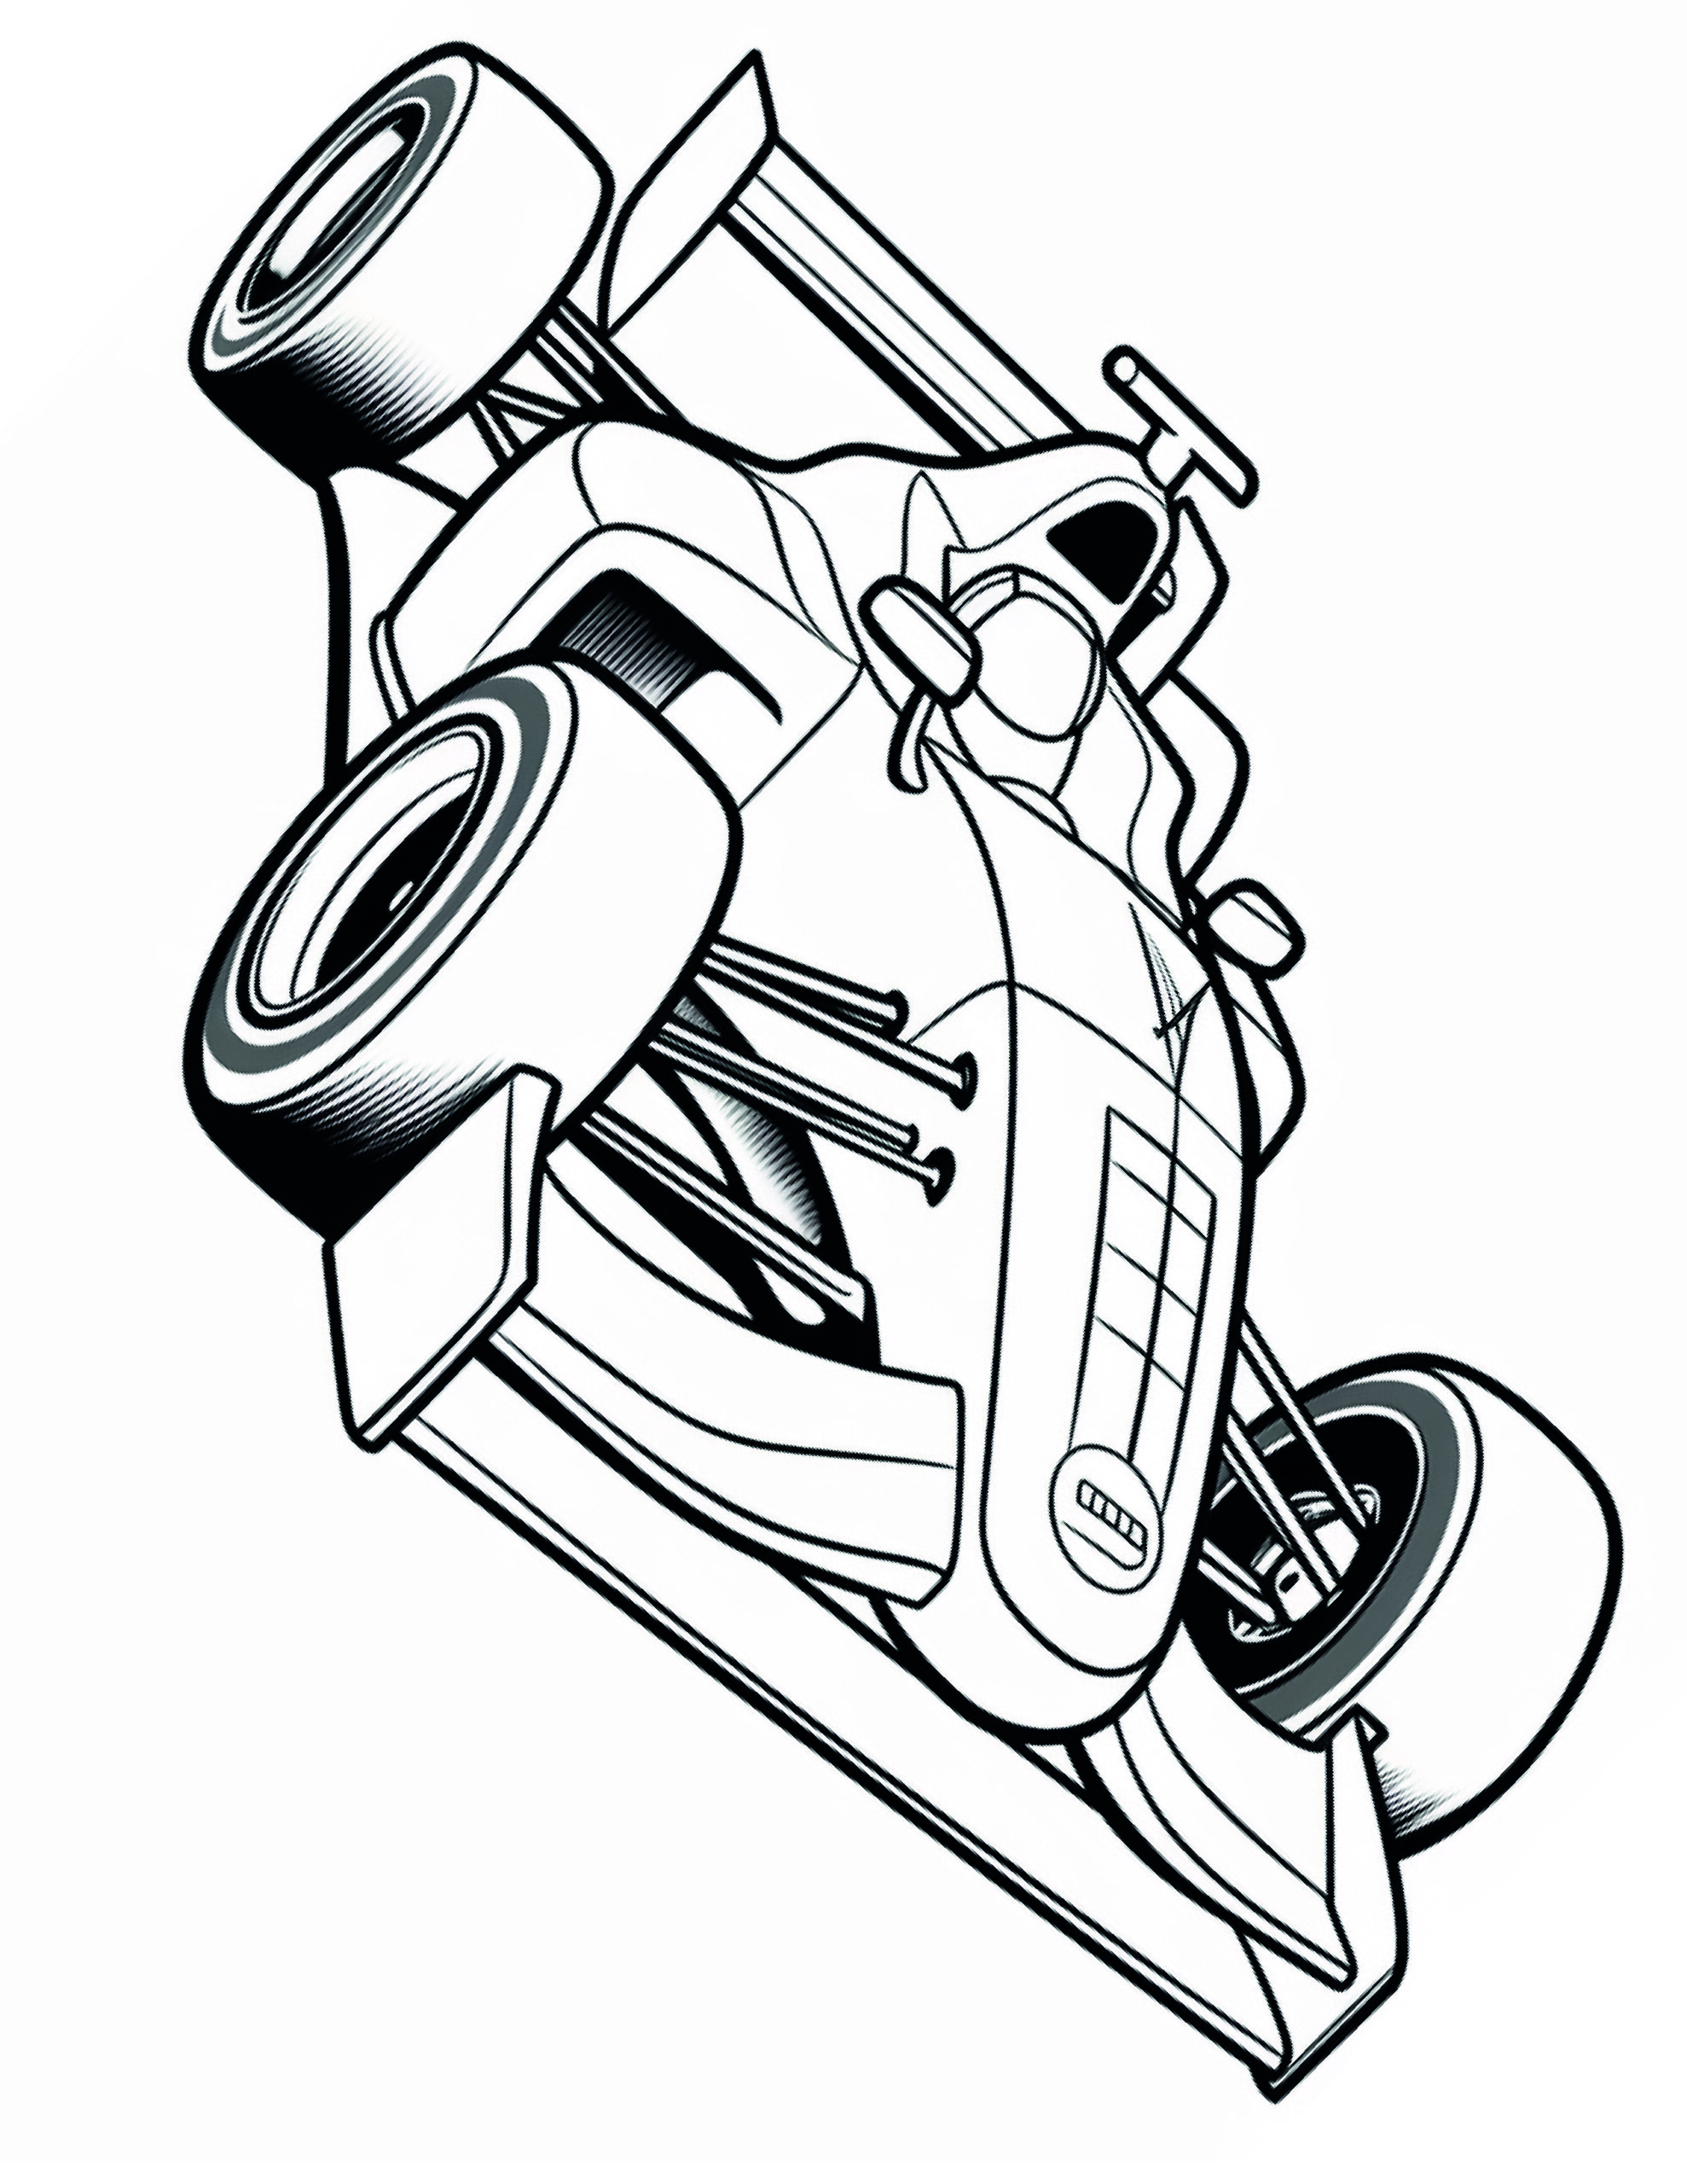 Race Car Coloring Page 1 - A line drawing of the outline of a formula one car.